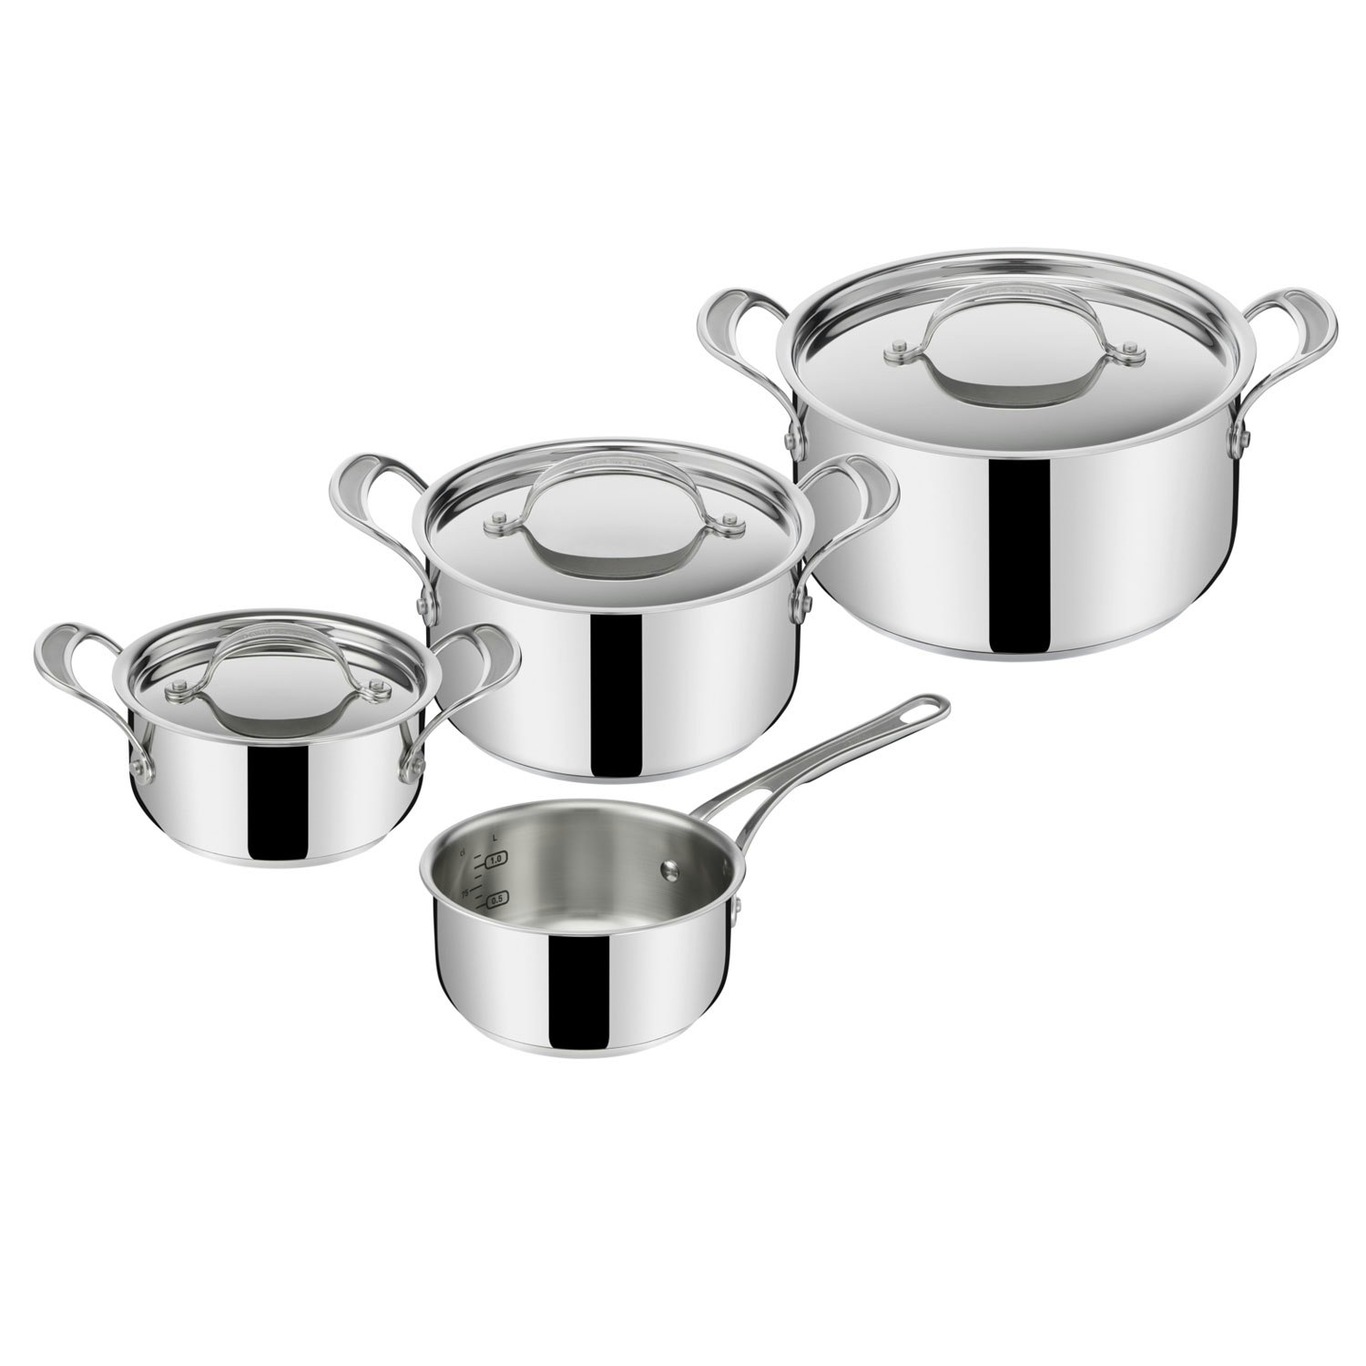 Tefal Essential Pots and Pans Set, 5 Count (Pack of 1), Black